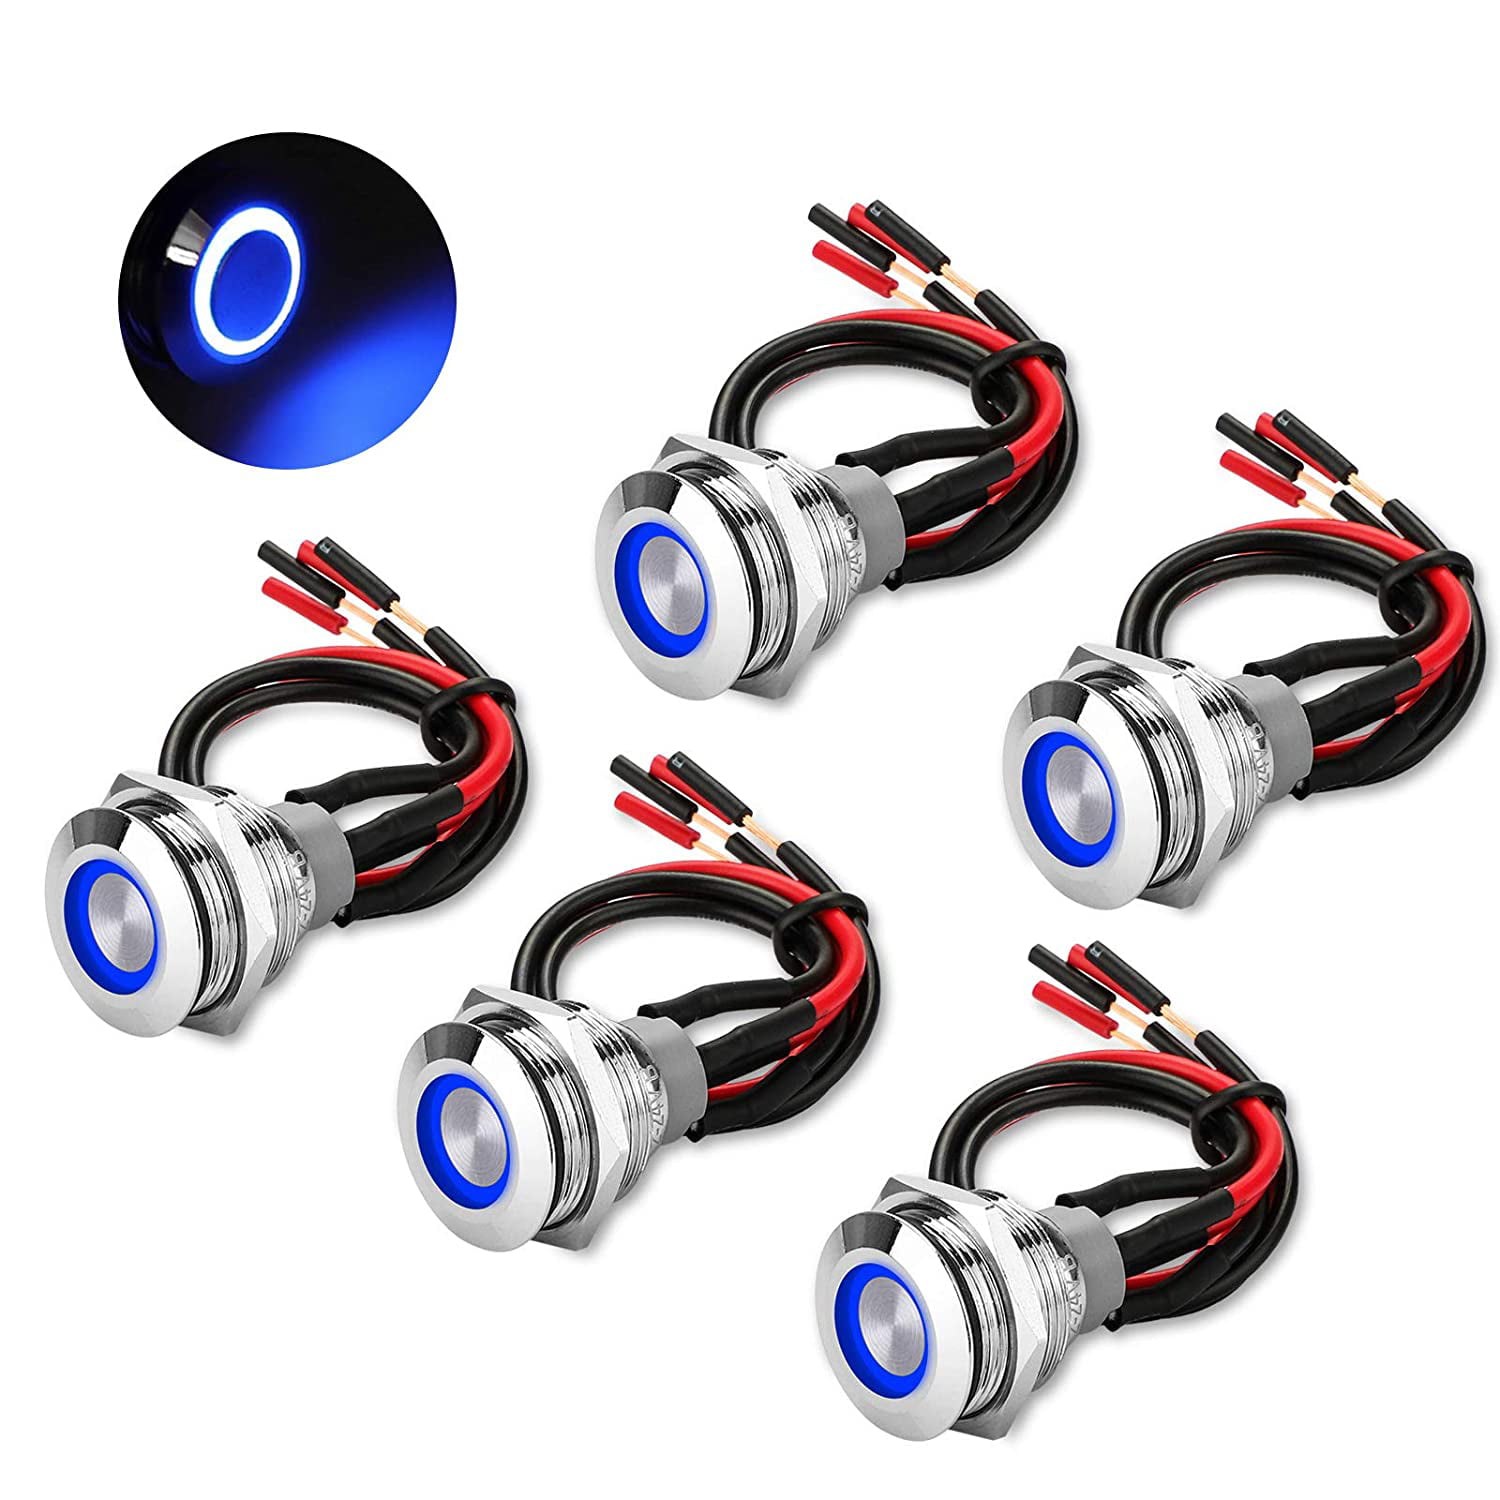 ON Push Button Car/Boat Switch OF 5Pcs 12mm Colorful Locking Latching OFF 